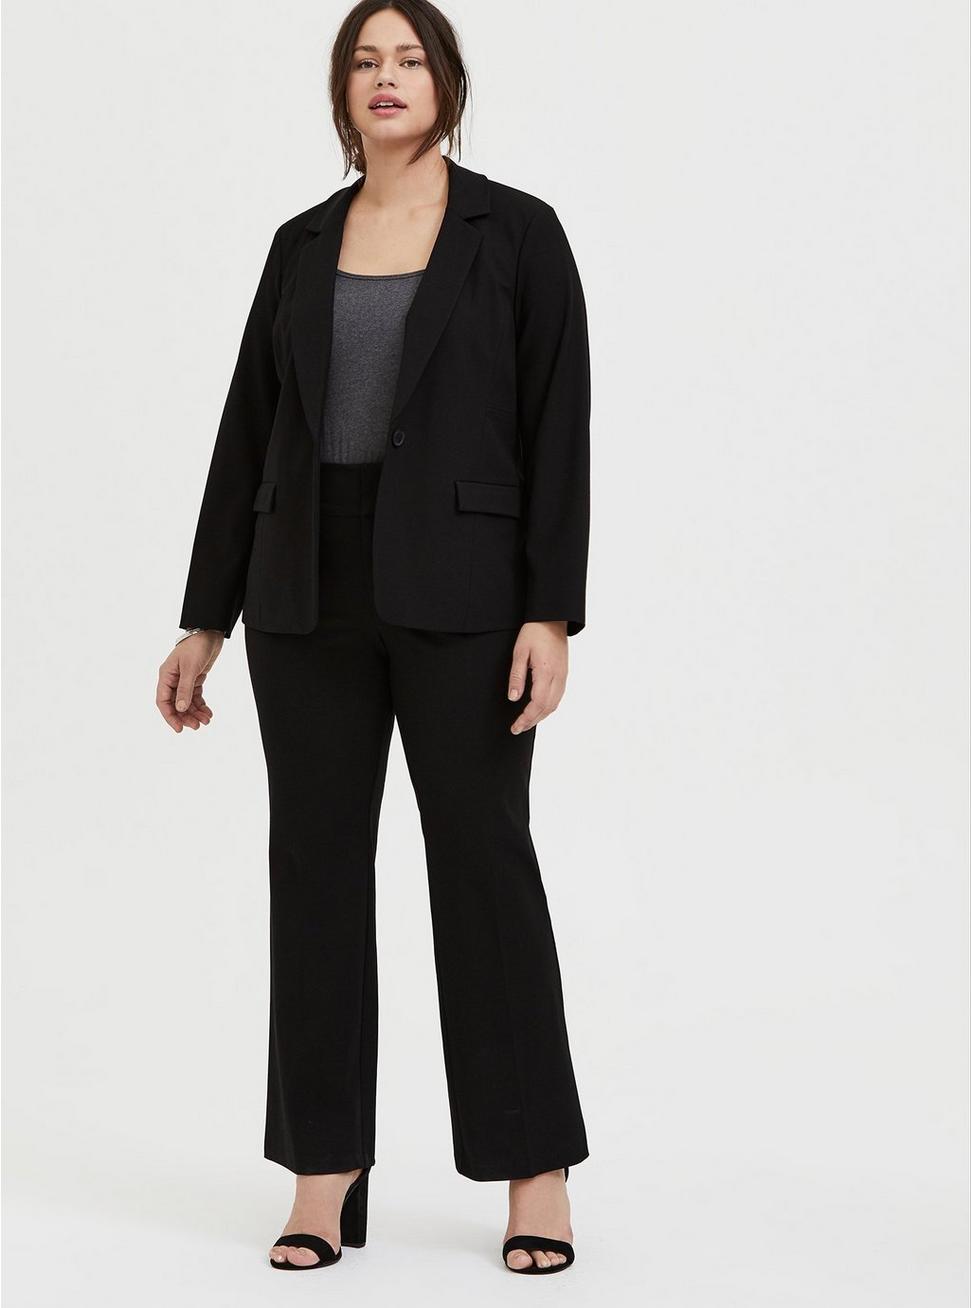 Plus Size - Relaxed Boot Leg Pant - Structured Twill Black - Torrid